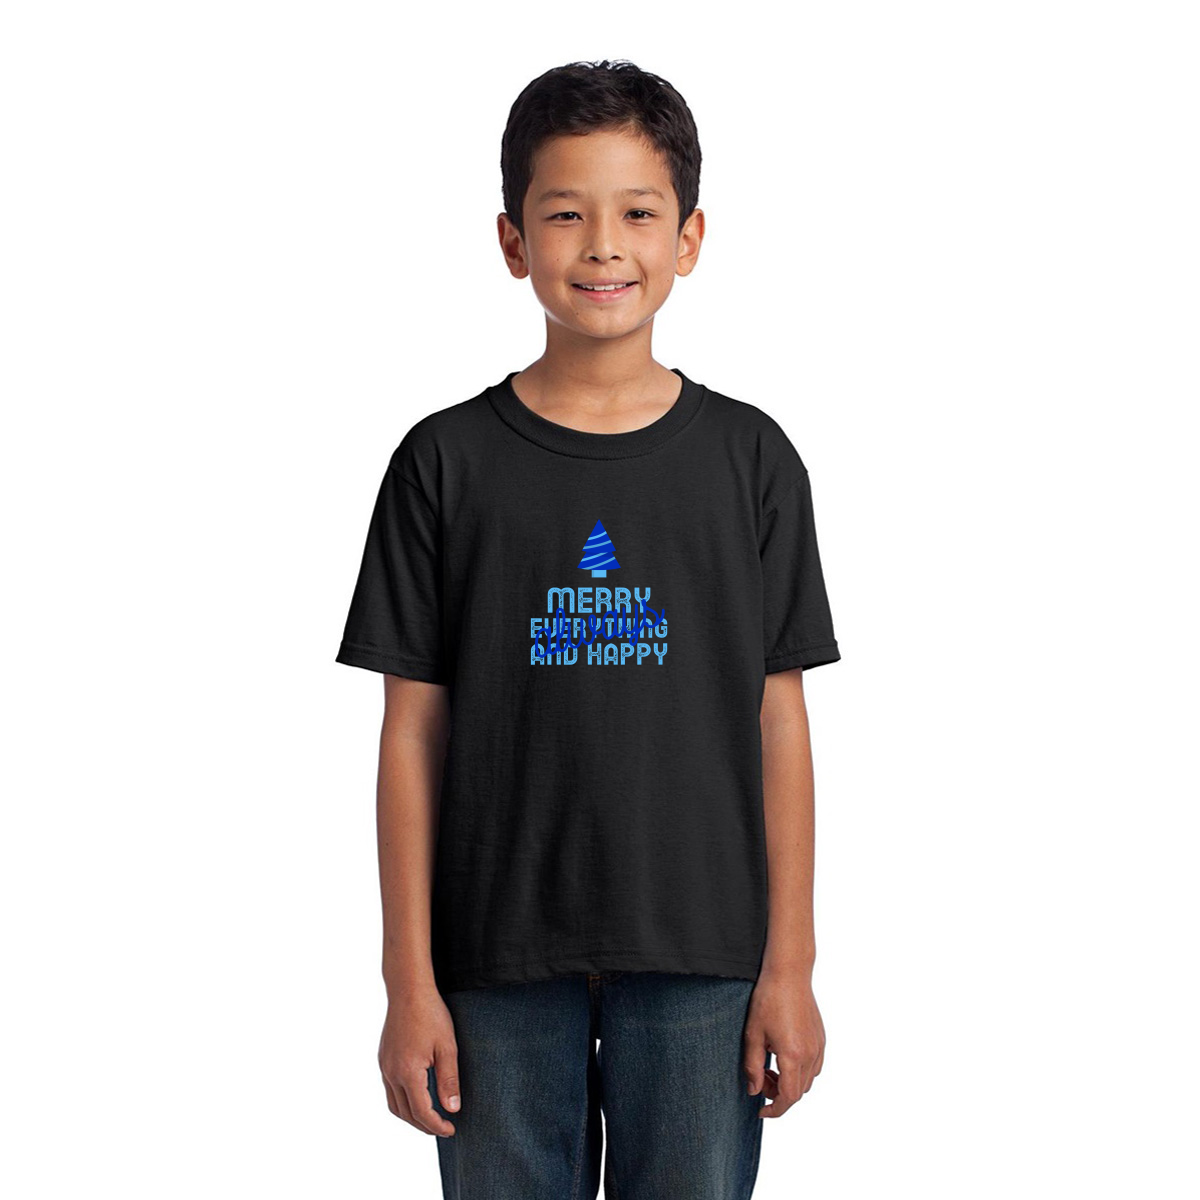 Always Merry Everything and Happy Kids T-shirt | Black